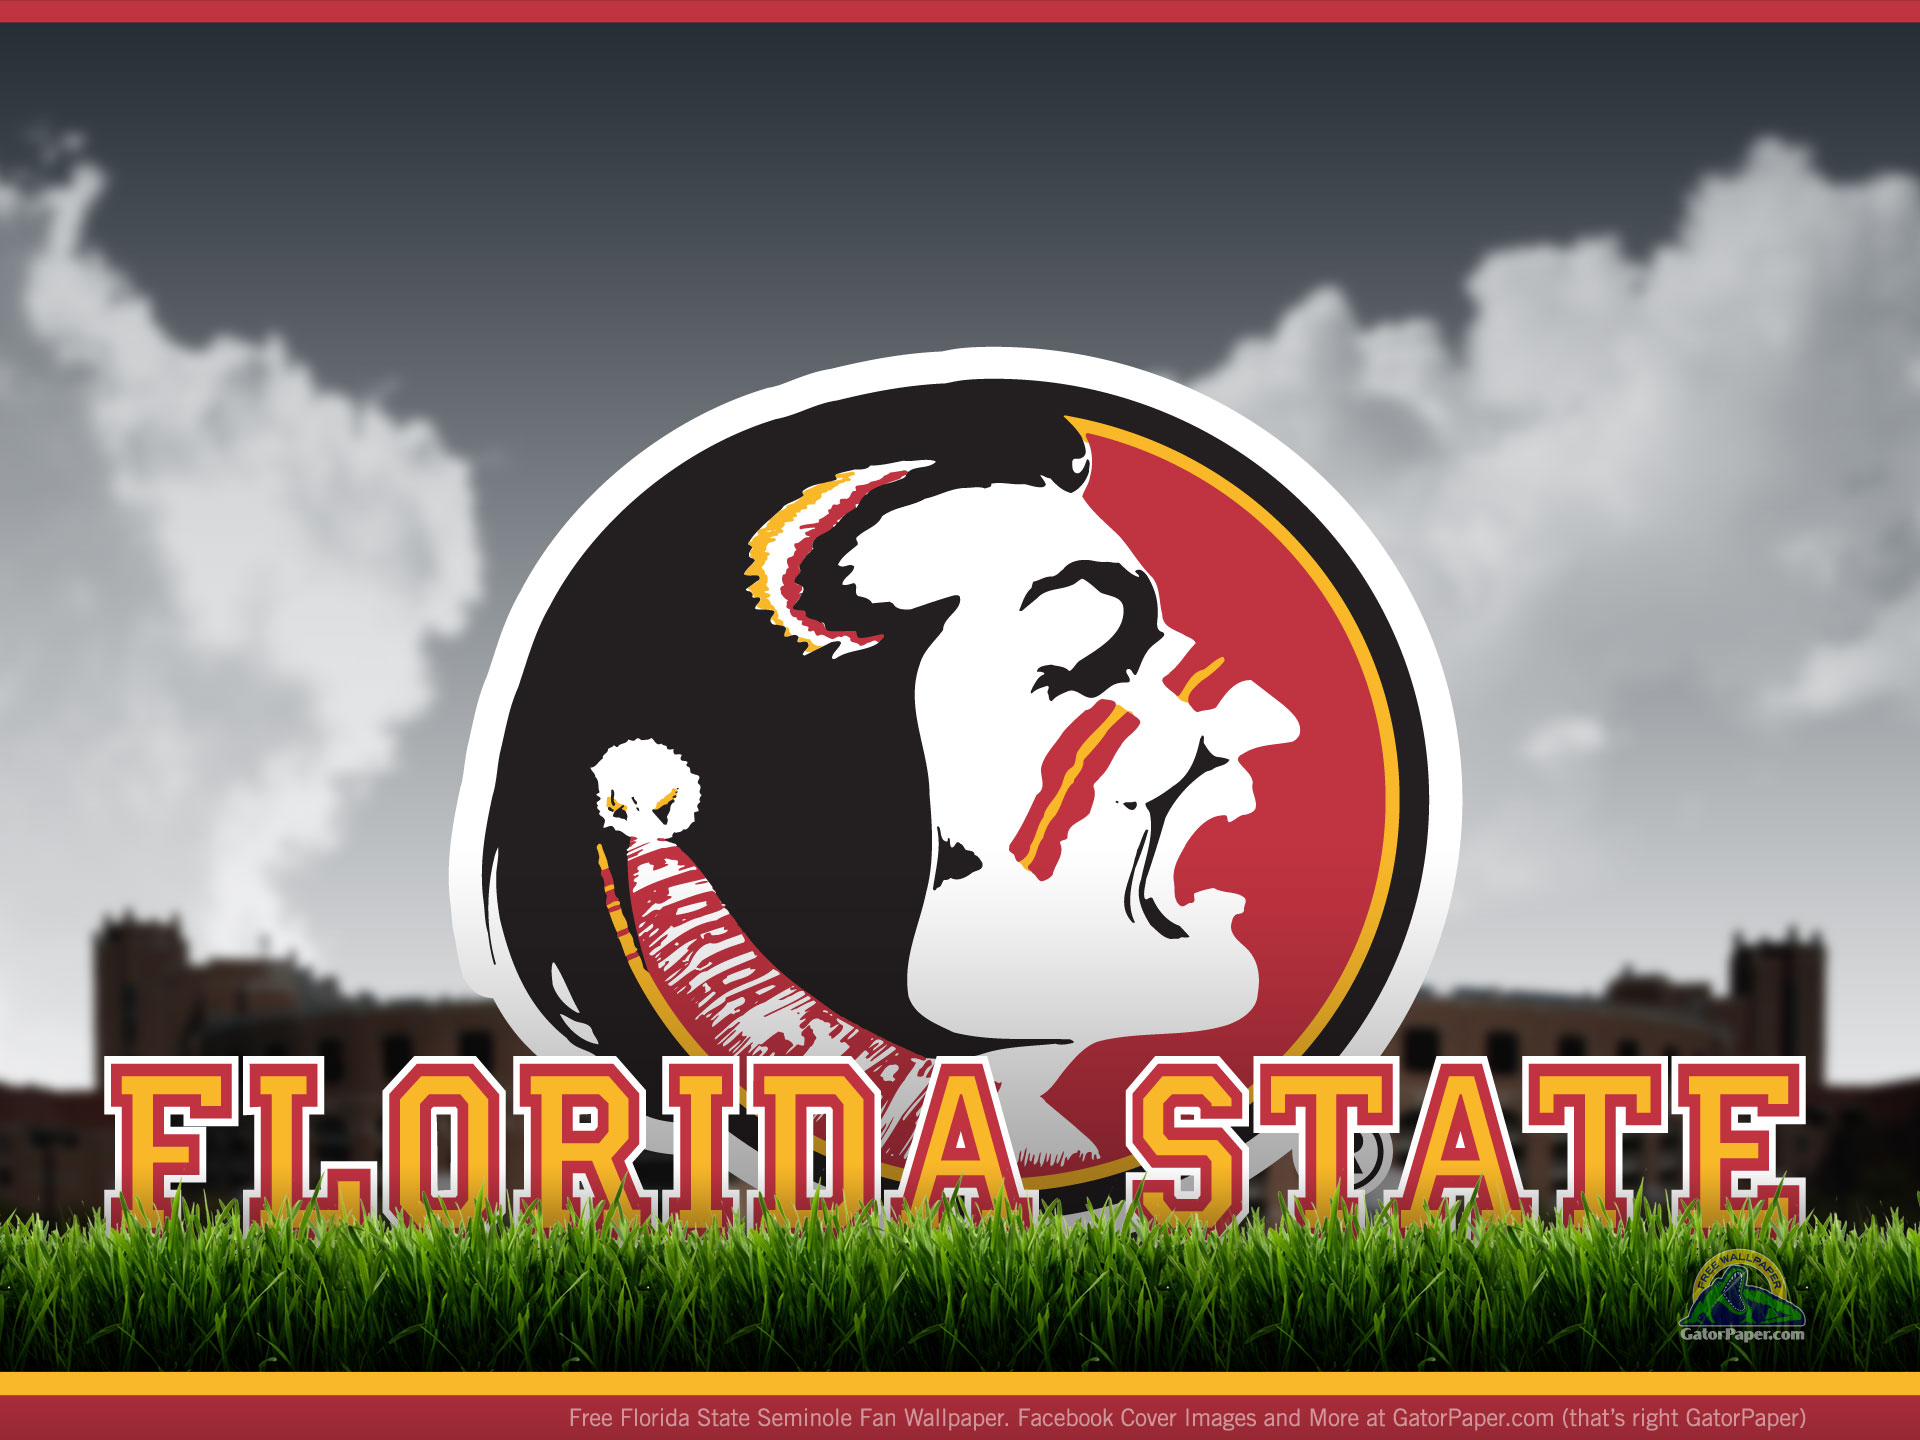 Background And Fsu Related Wallpaper Premium Royalty